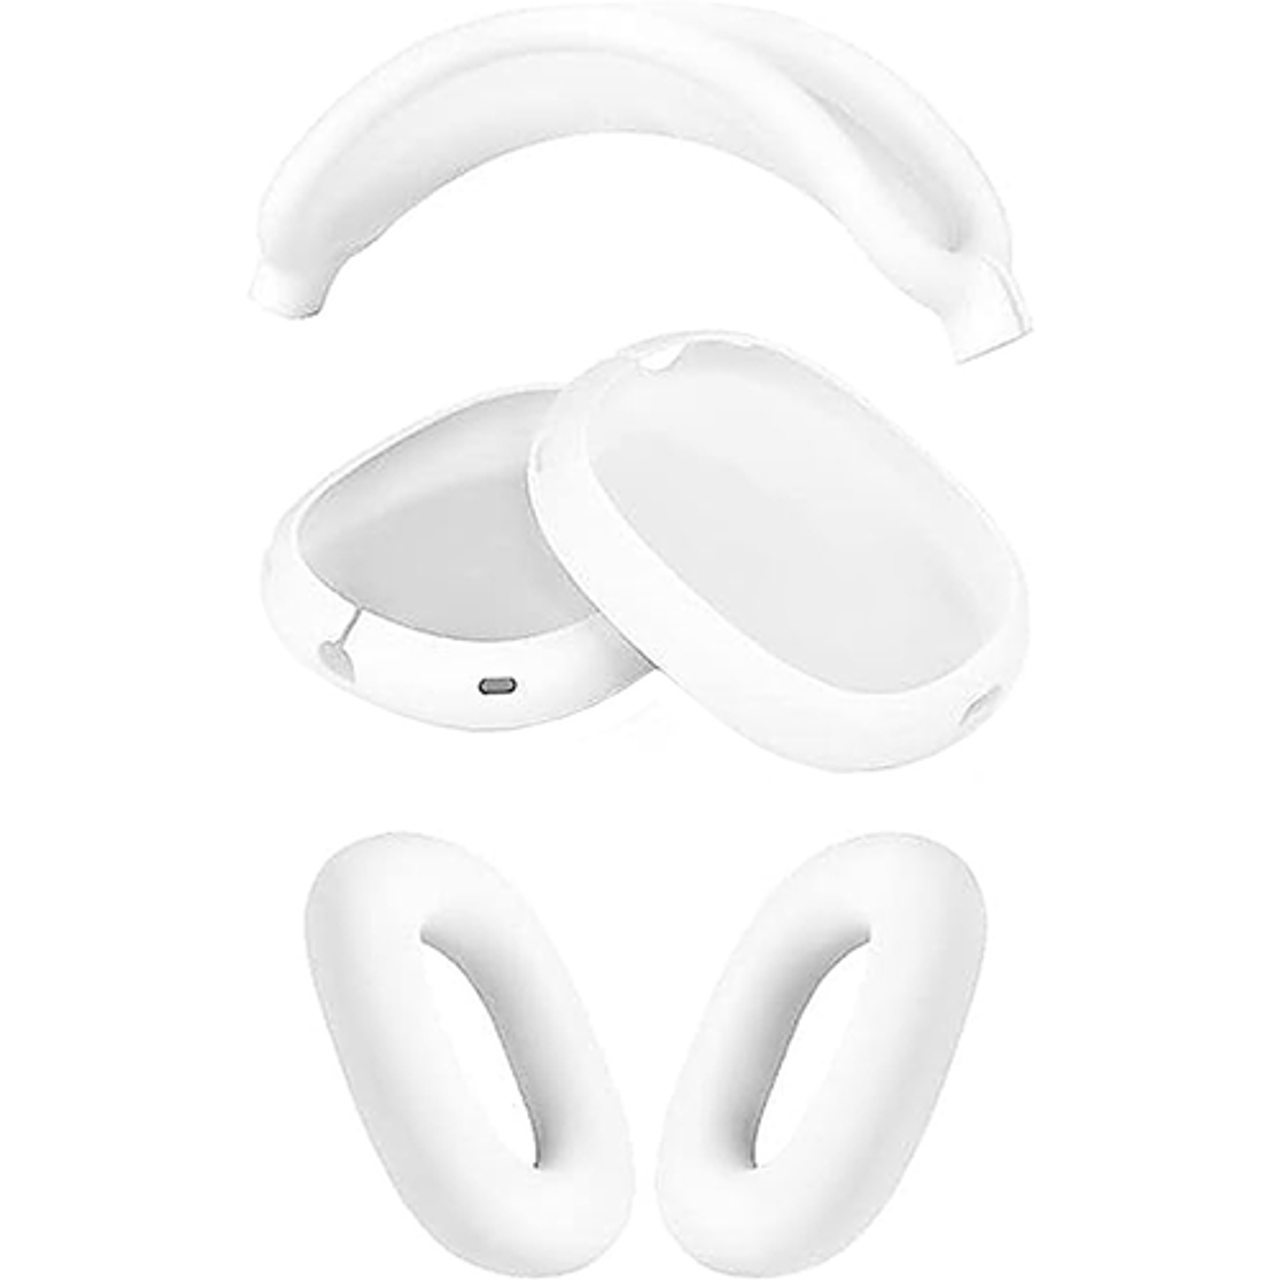 SaharaCase - Silicone Combo Kit Case for Apple AirPods Max Headphones - White